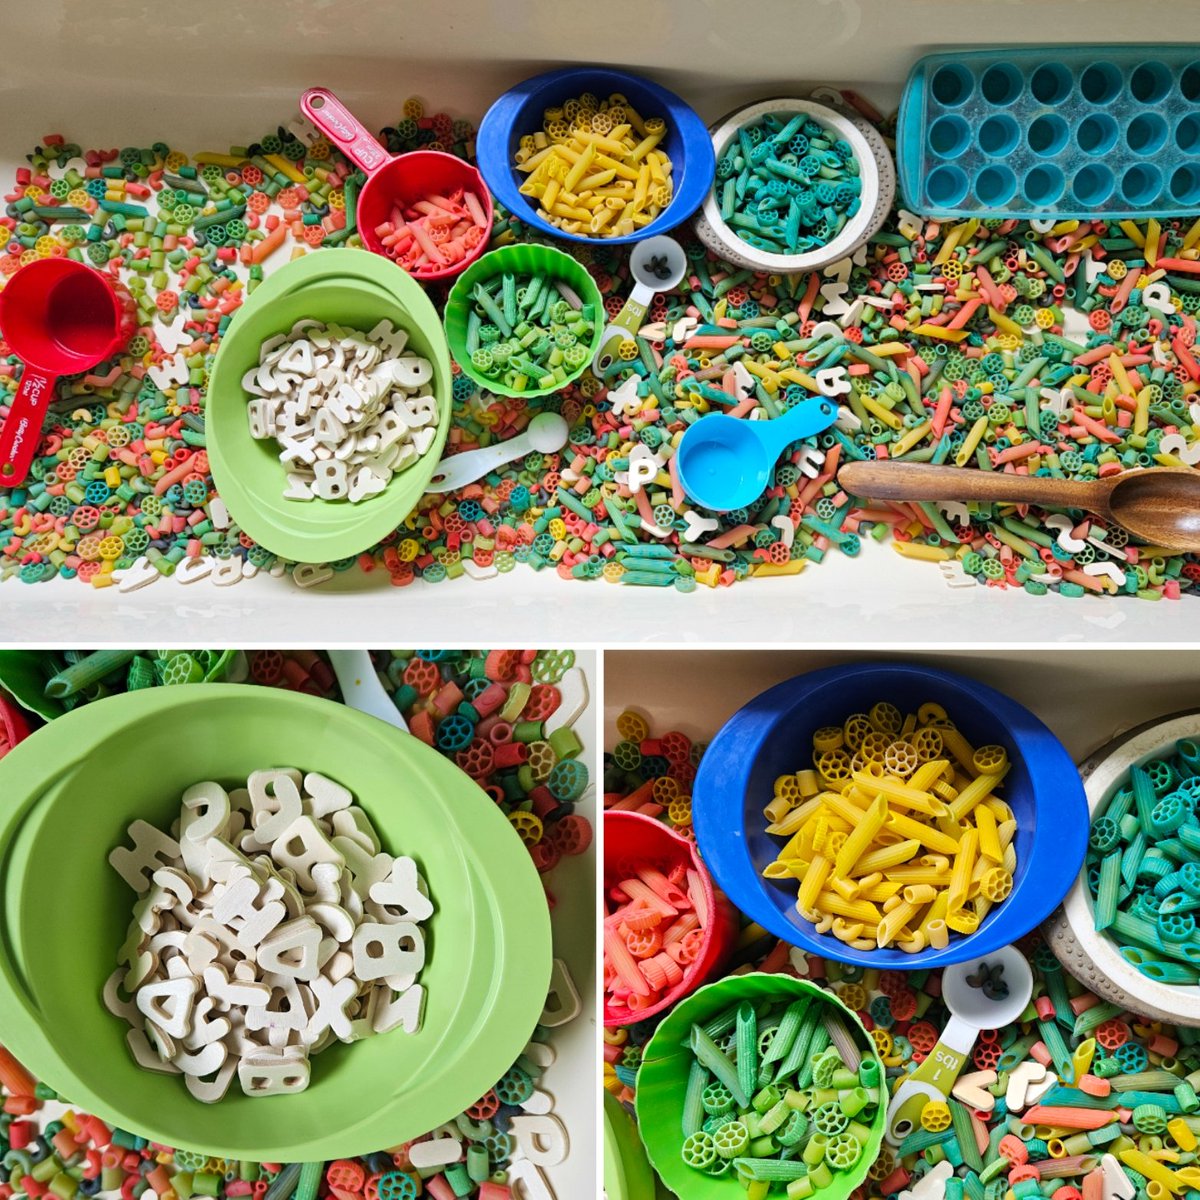 The sensory bin is one of our favourite centres. This week the Maples are enjoying an 'alphabet soup' sensory bin! @StRitaOCSB #LearningThroughPlay